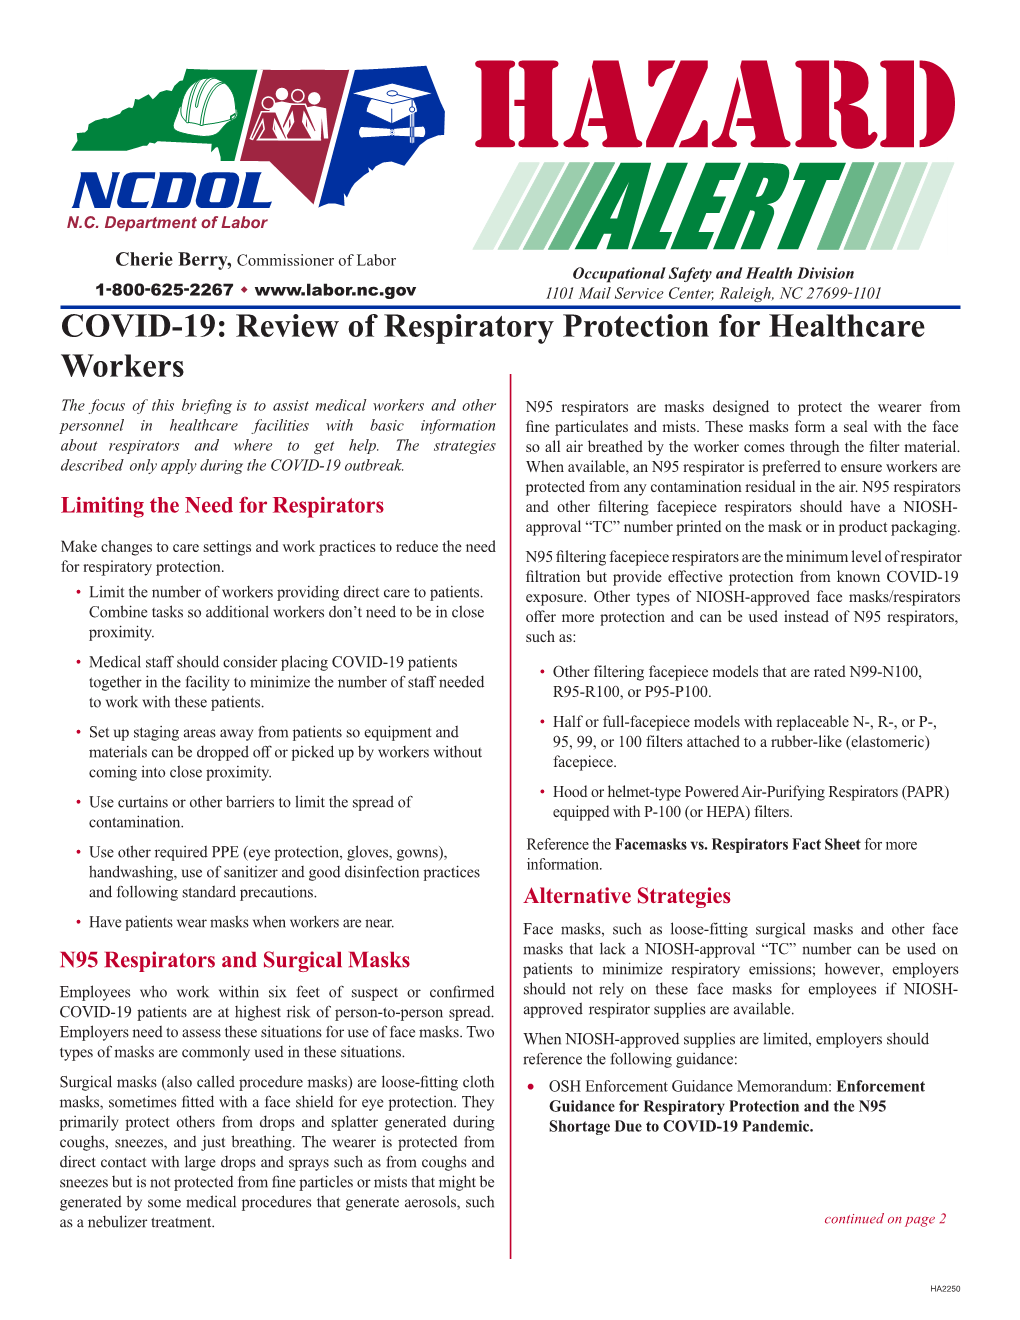 COVID-19: Review of Respiratory Protection for Healthcare Workers